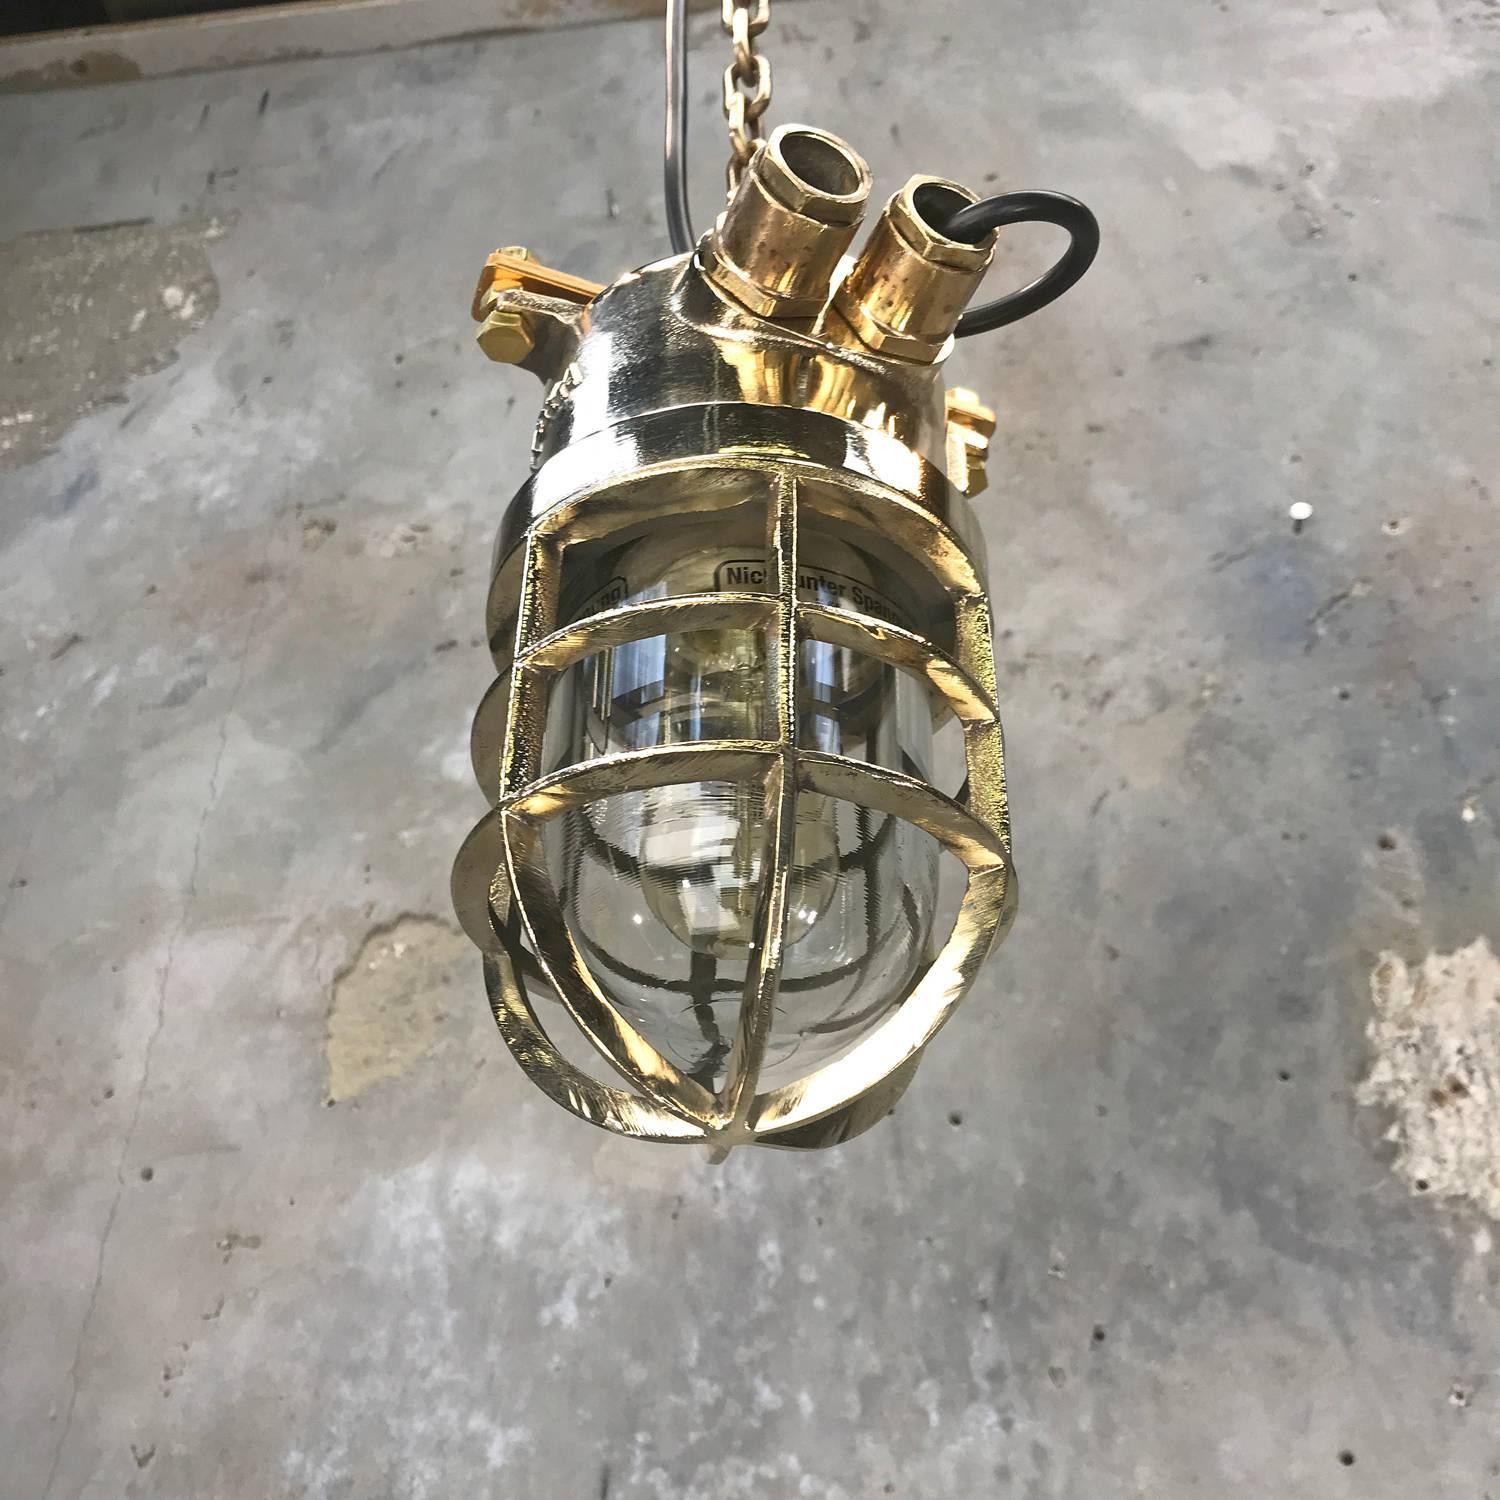 Late Century German Cast Brass and Glass Shade Explosion Proof Pendant Light For Sale 1